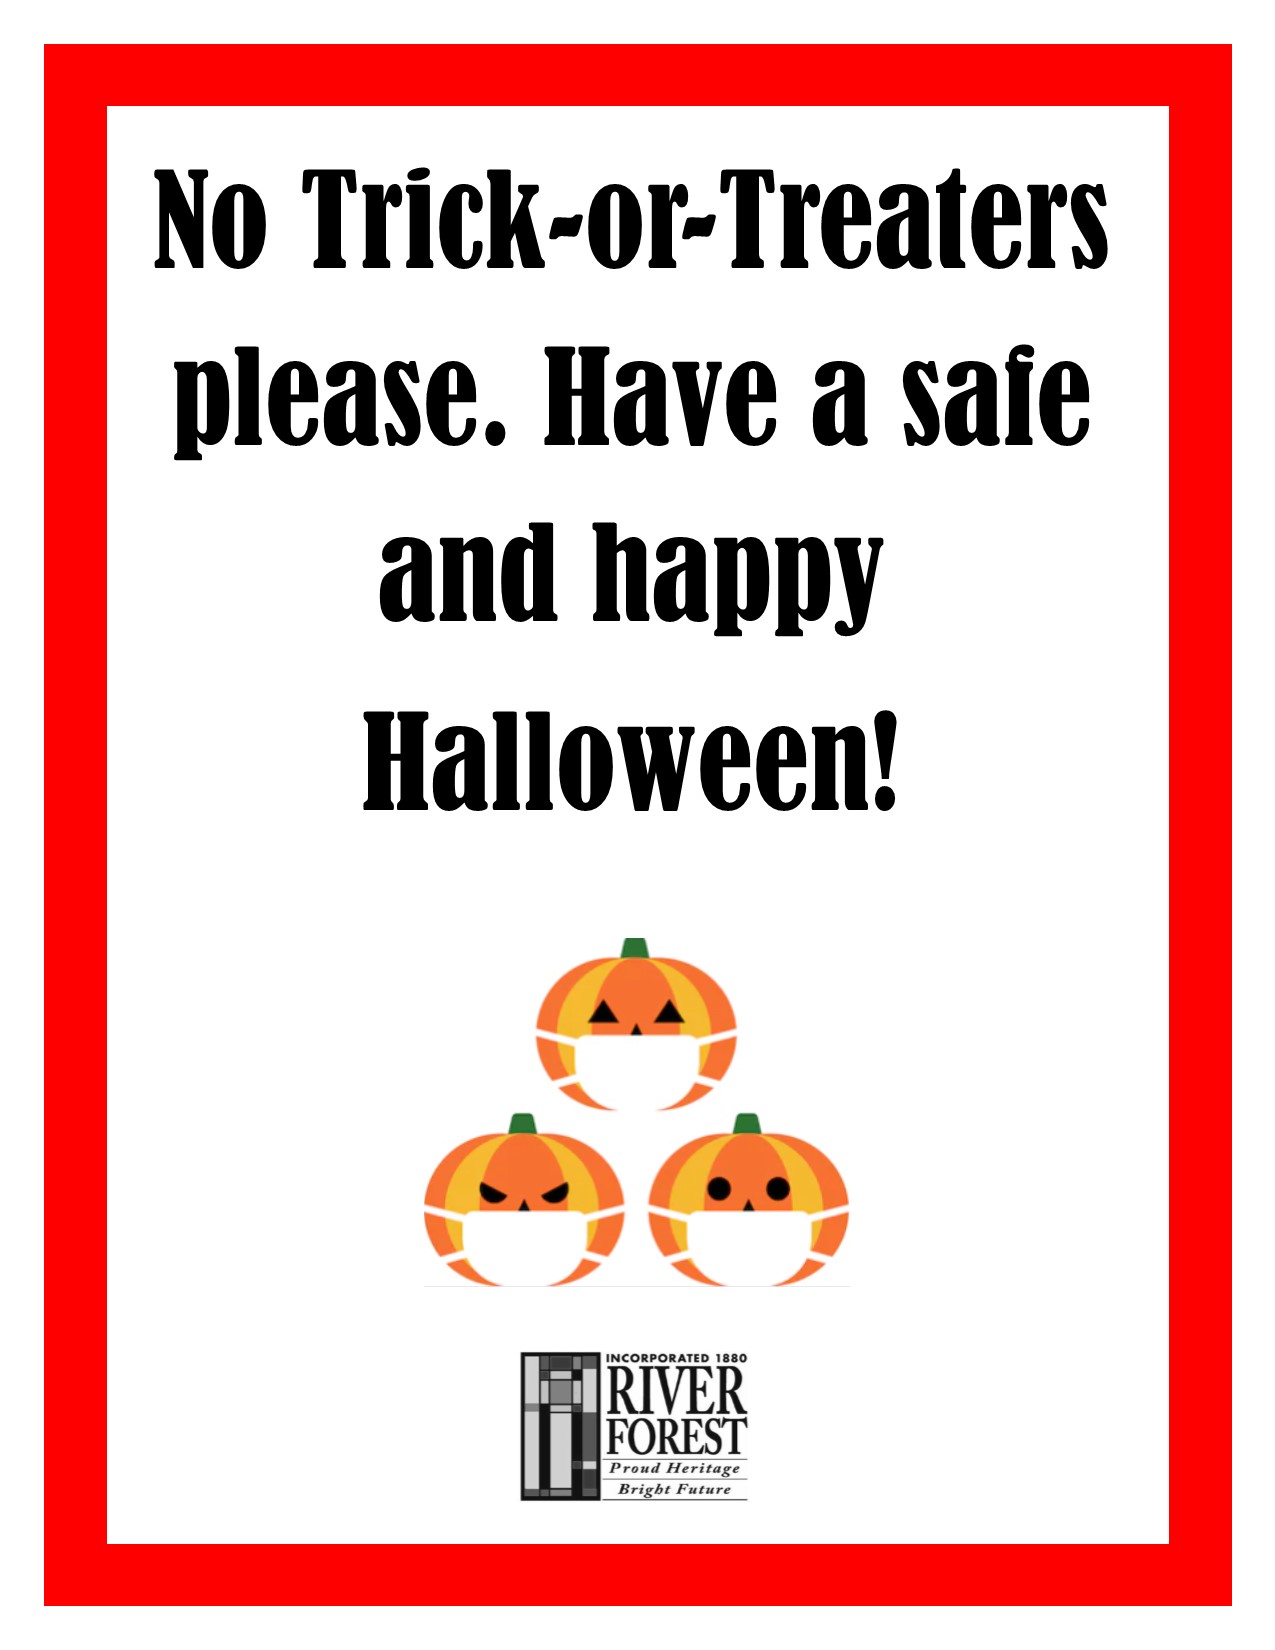 village-issues-trick-or-treating-guidelines-for-river-forest-oak-park-il-patch